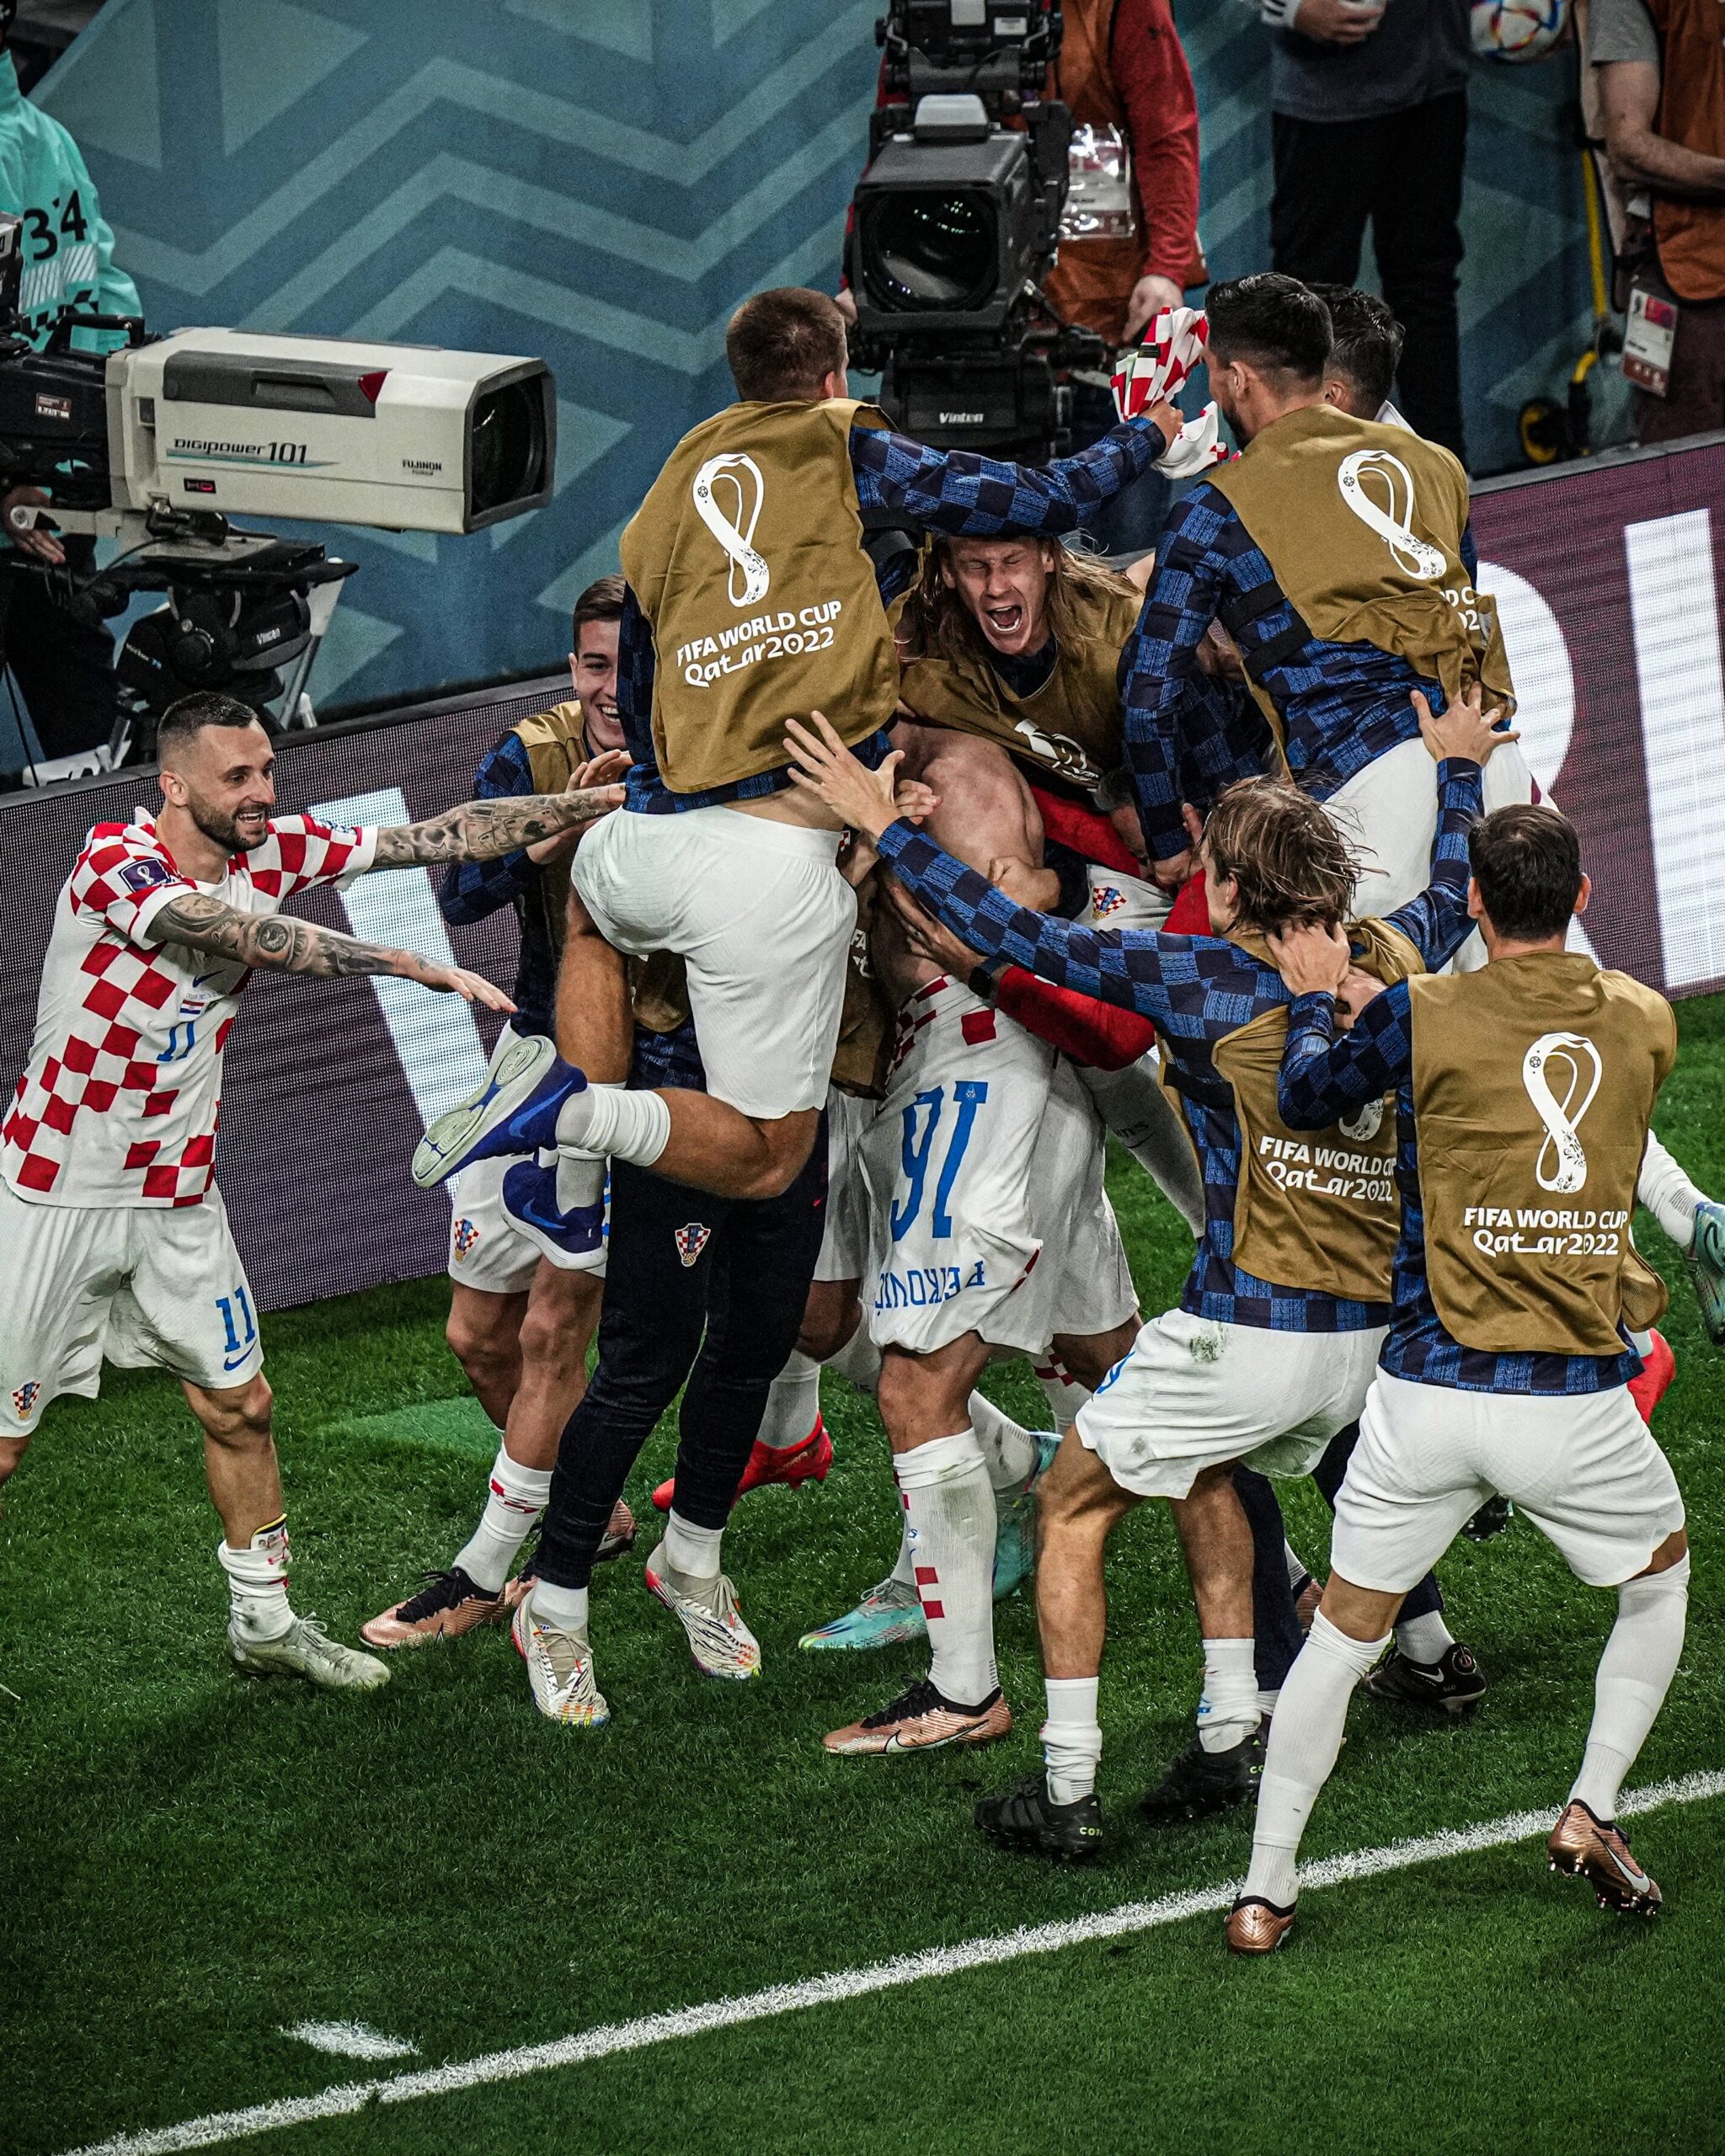 BREAKING: Croatia Knock Brazil Out Of FIFA World Cup 2022 [Video]